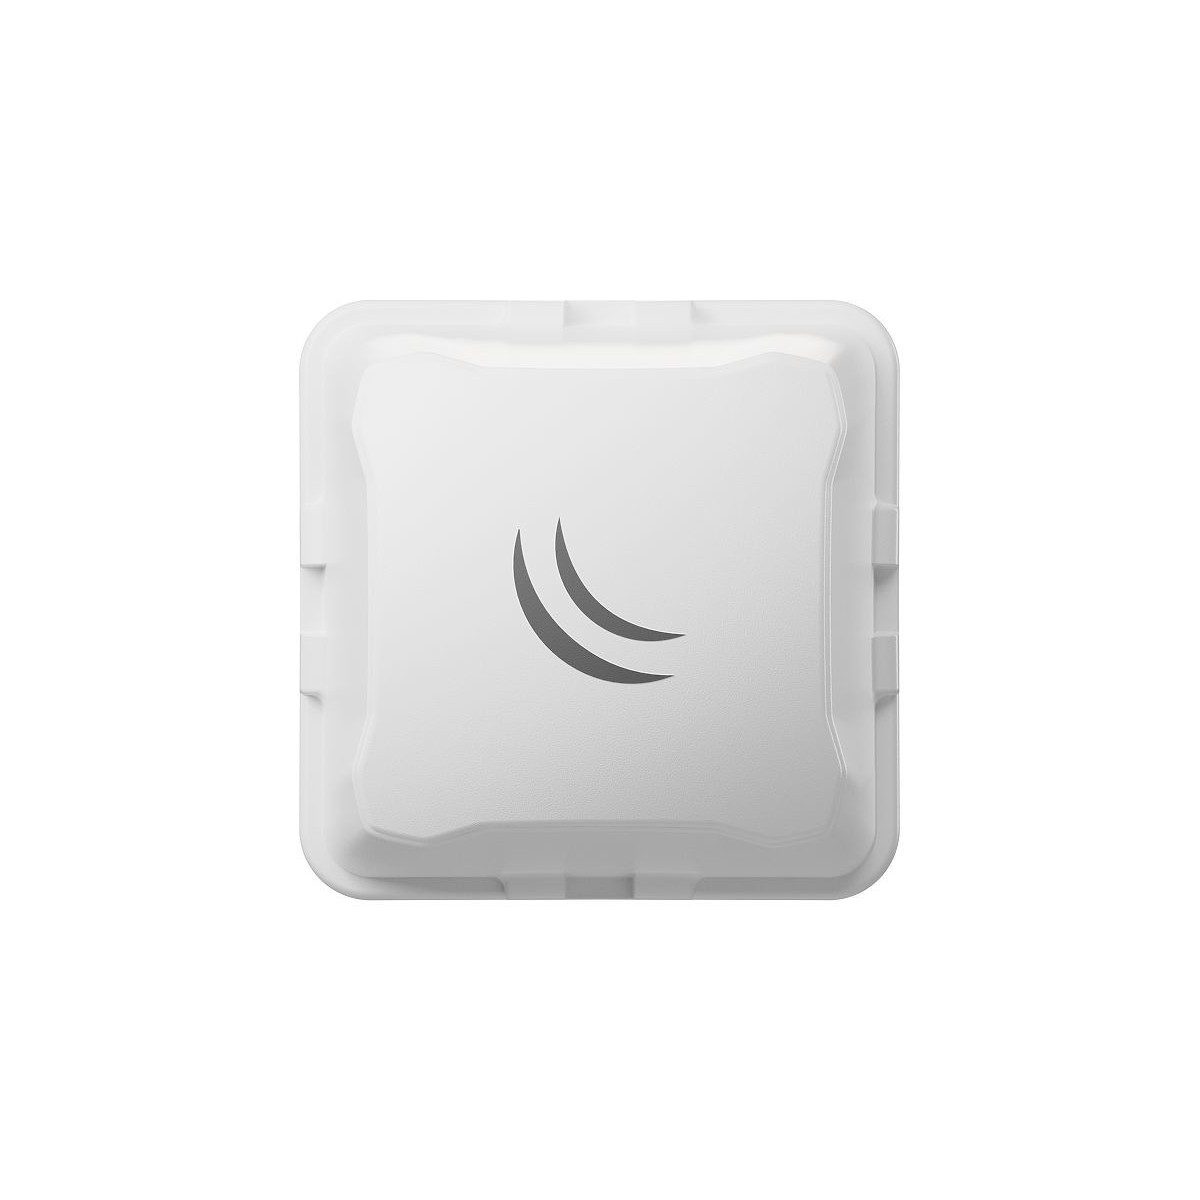 MikroTik Cube 60G ac 60 GHz CPE Point-to-Point & Multipoint 802.11ad RouterOS L3 - Bridge - WLAN